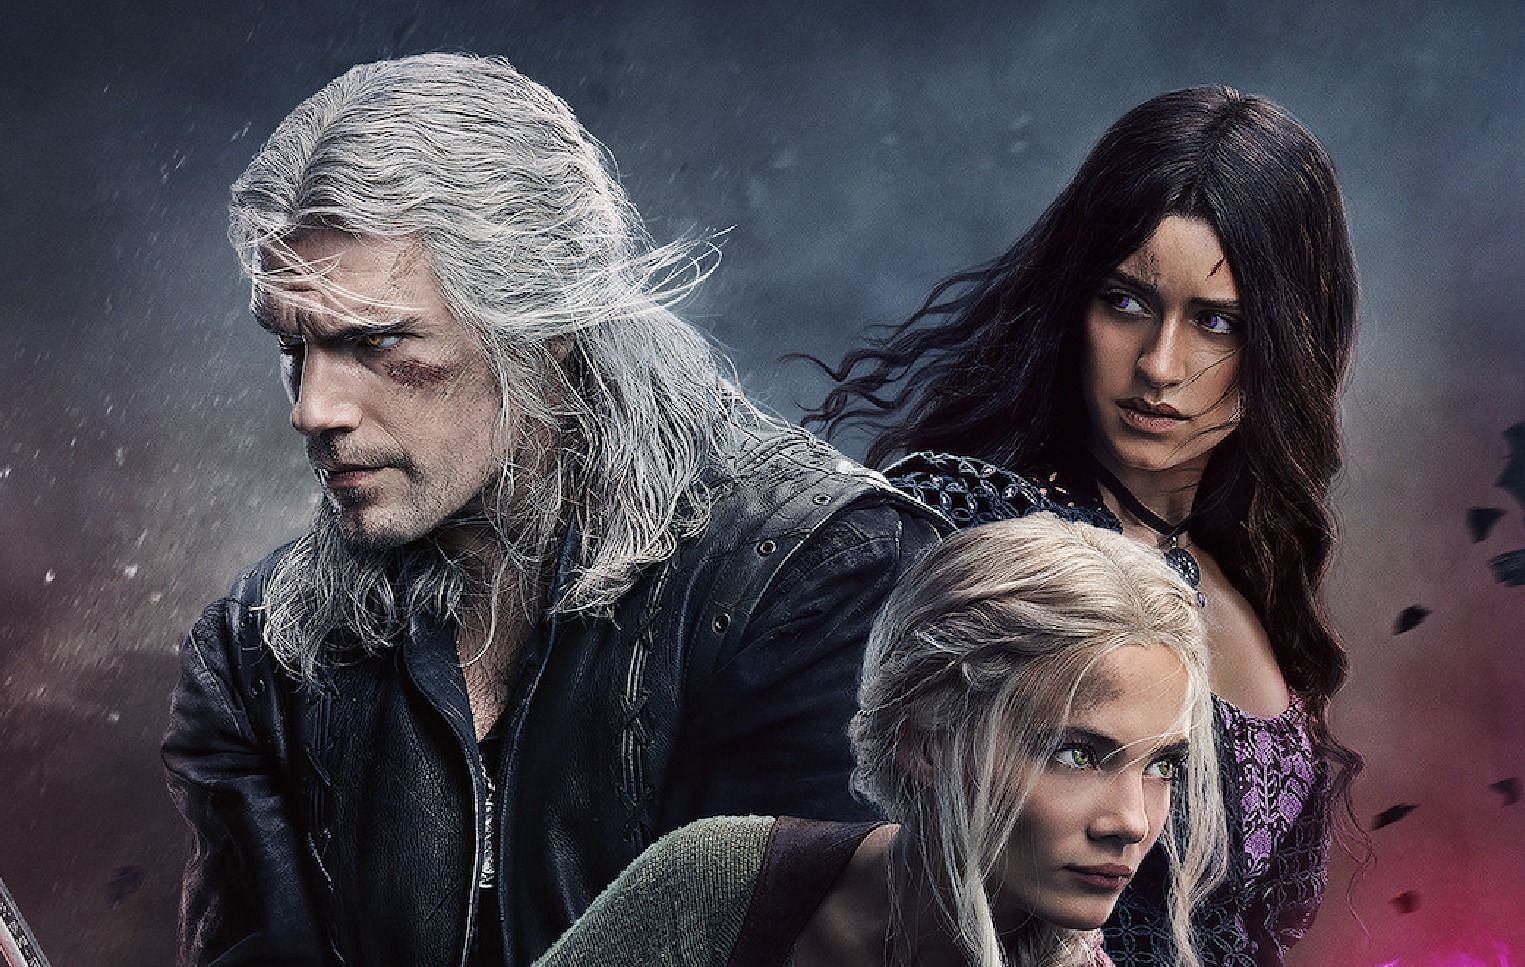 The Witcher season 3 cast list and characters explored